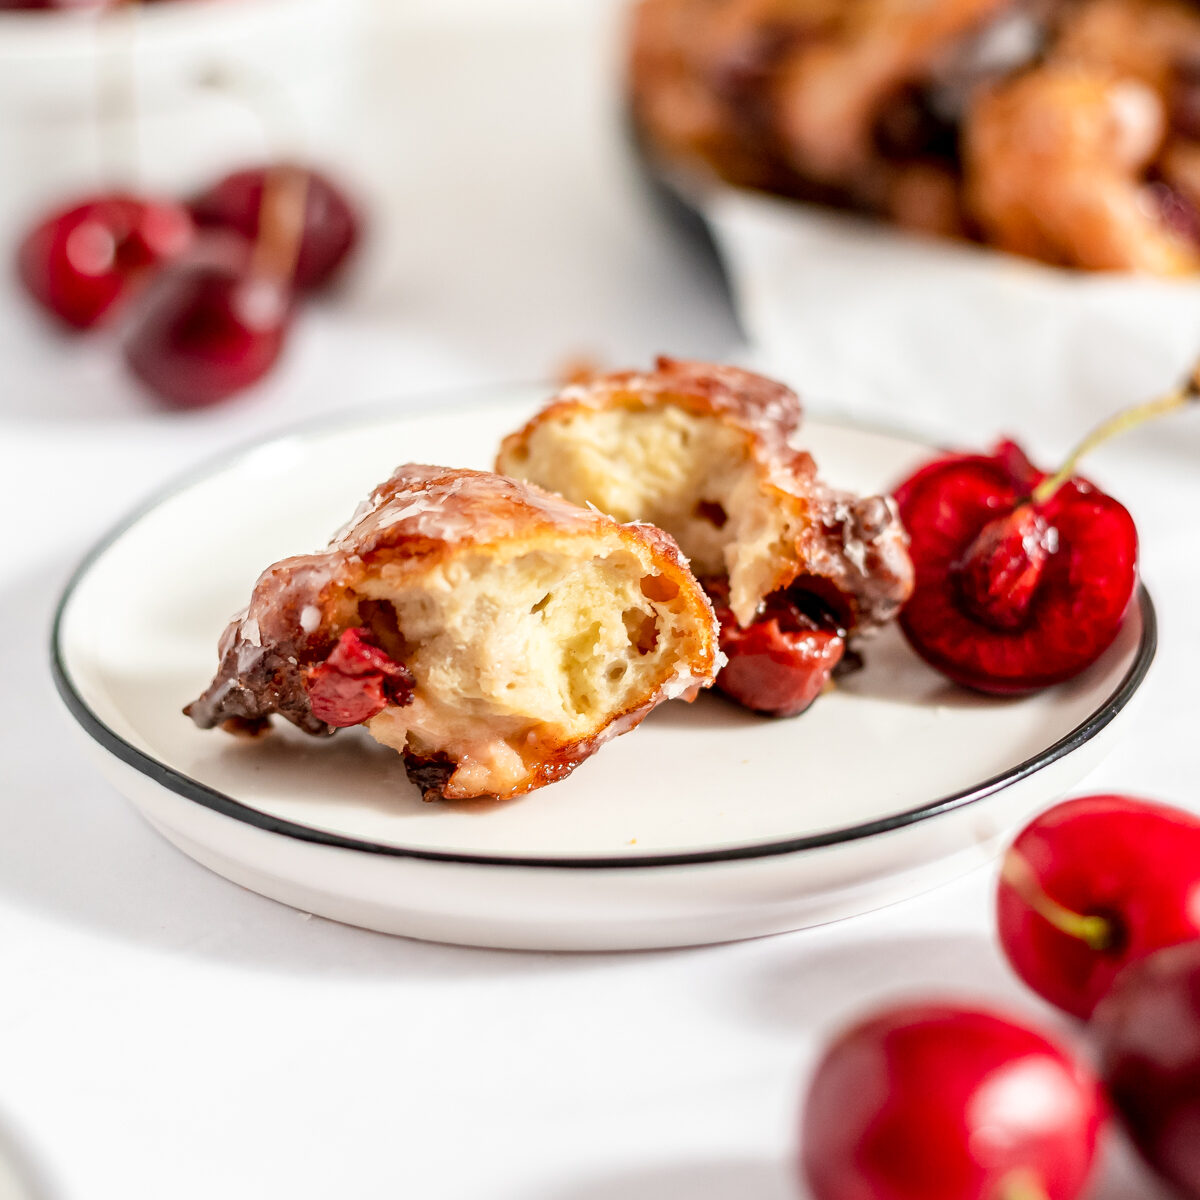 White plate with black rim holds a fritter that is pulled apart to reveal the tender inside texture. Cherries are scattered in front and behind the plate with more fritters in the background.